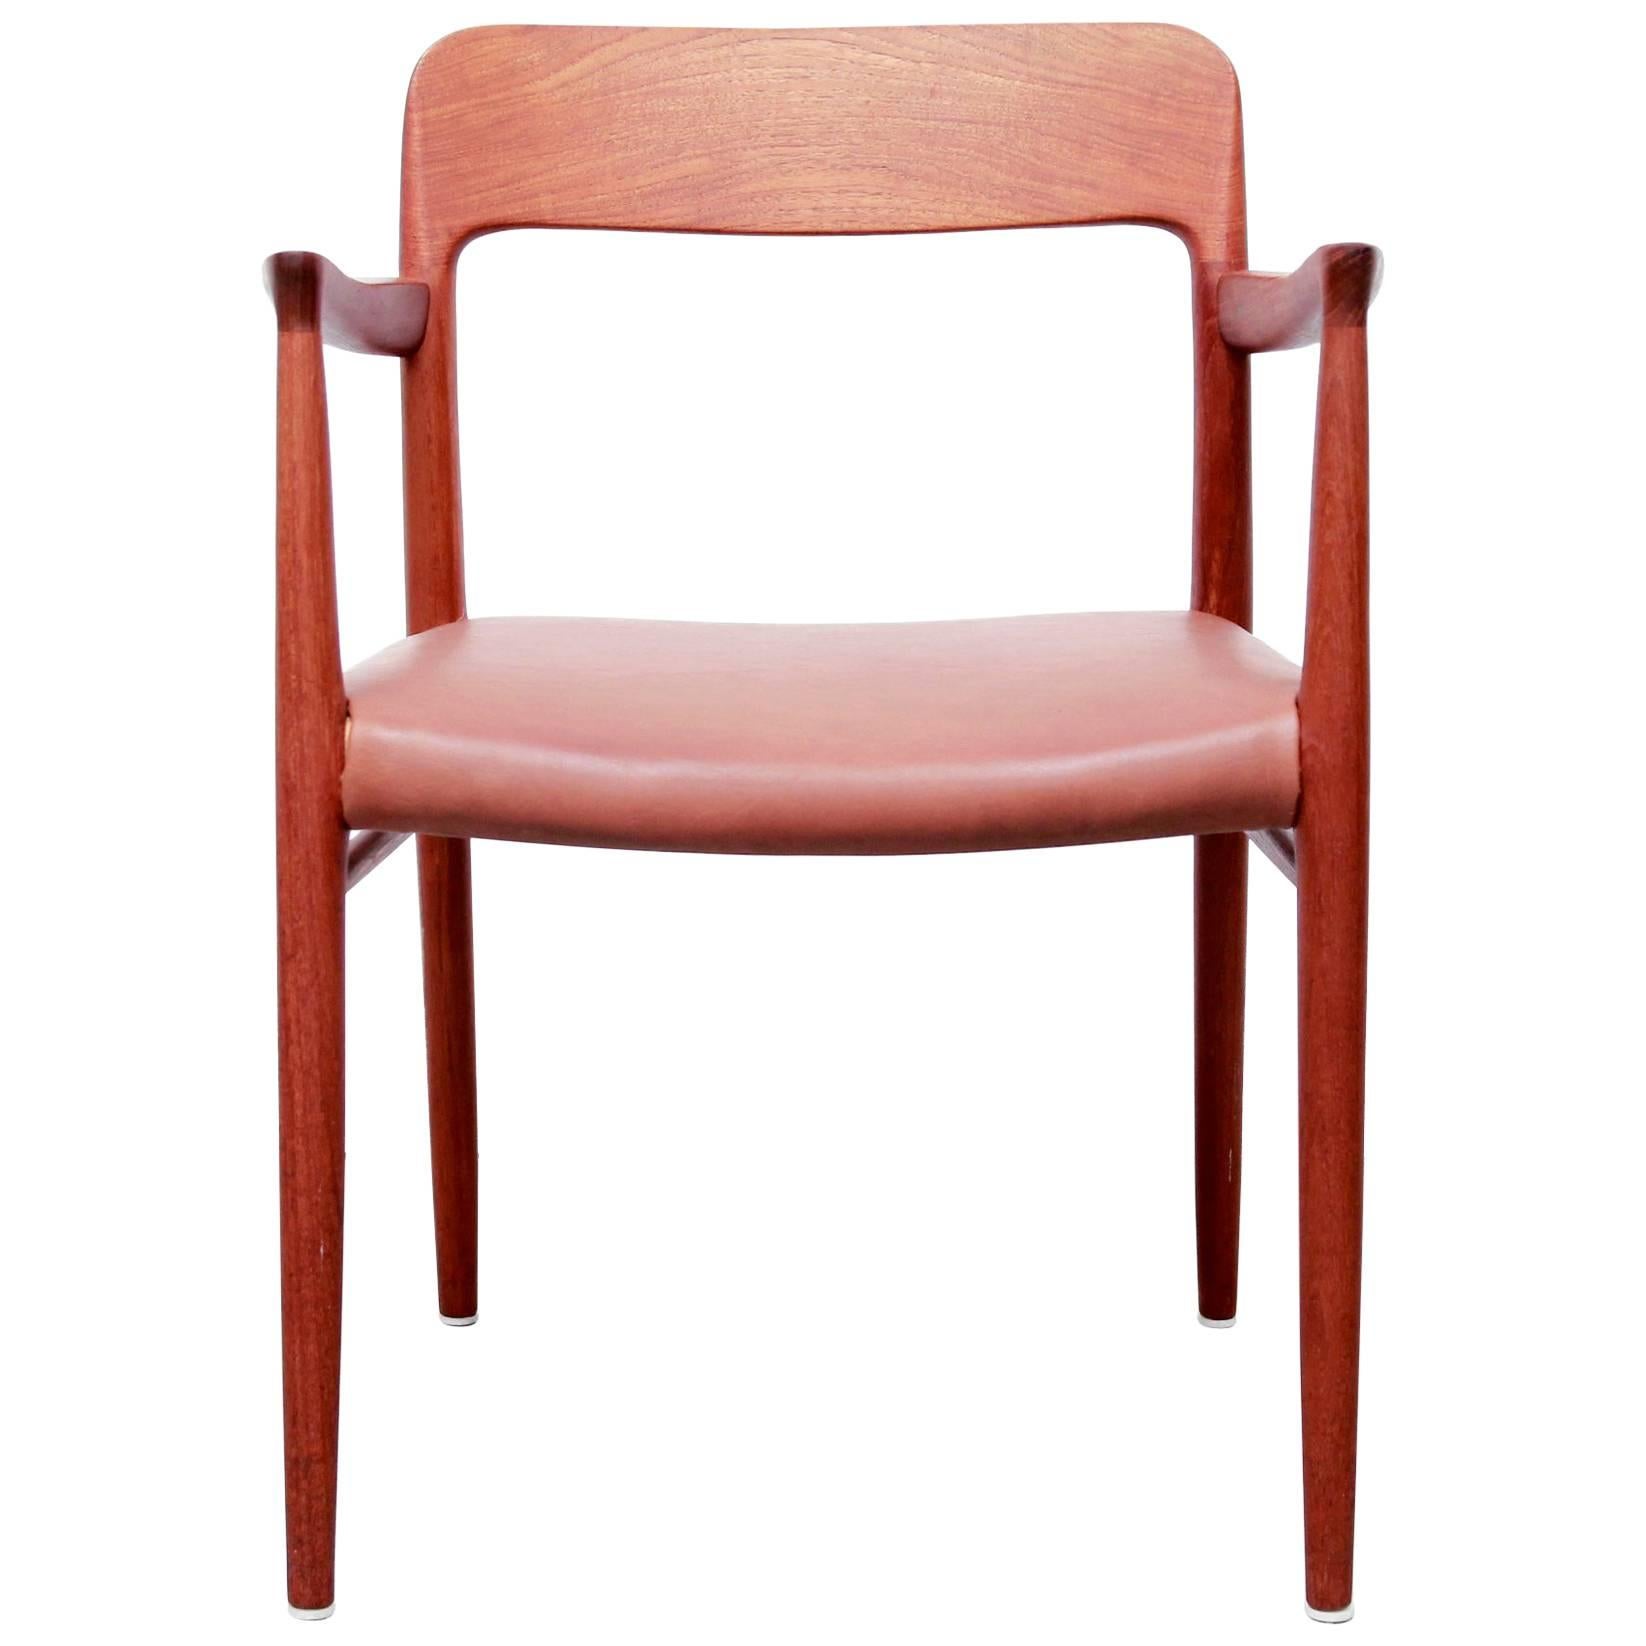 Model 56 Armchair in Teak and Brown Leather by Niels Otto Møller